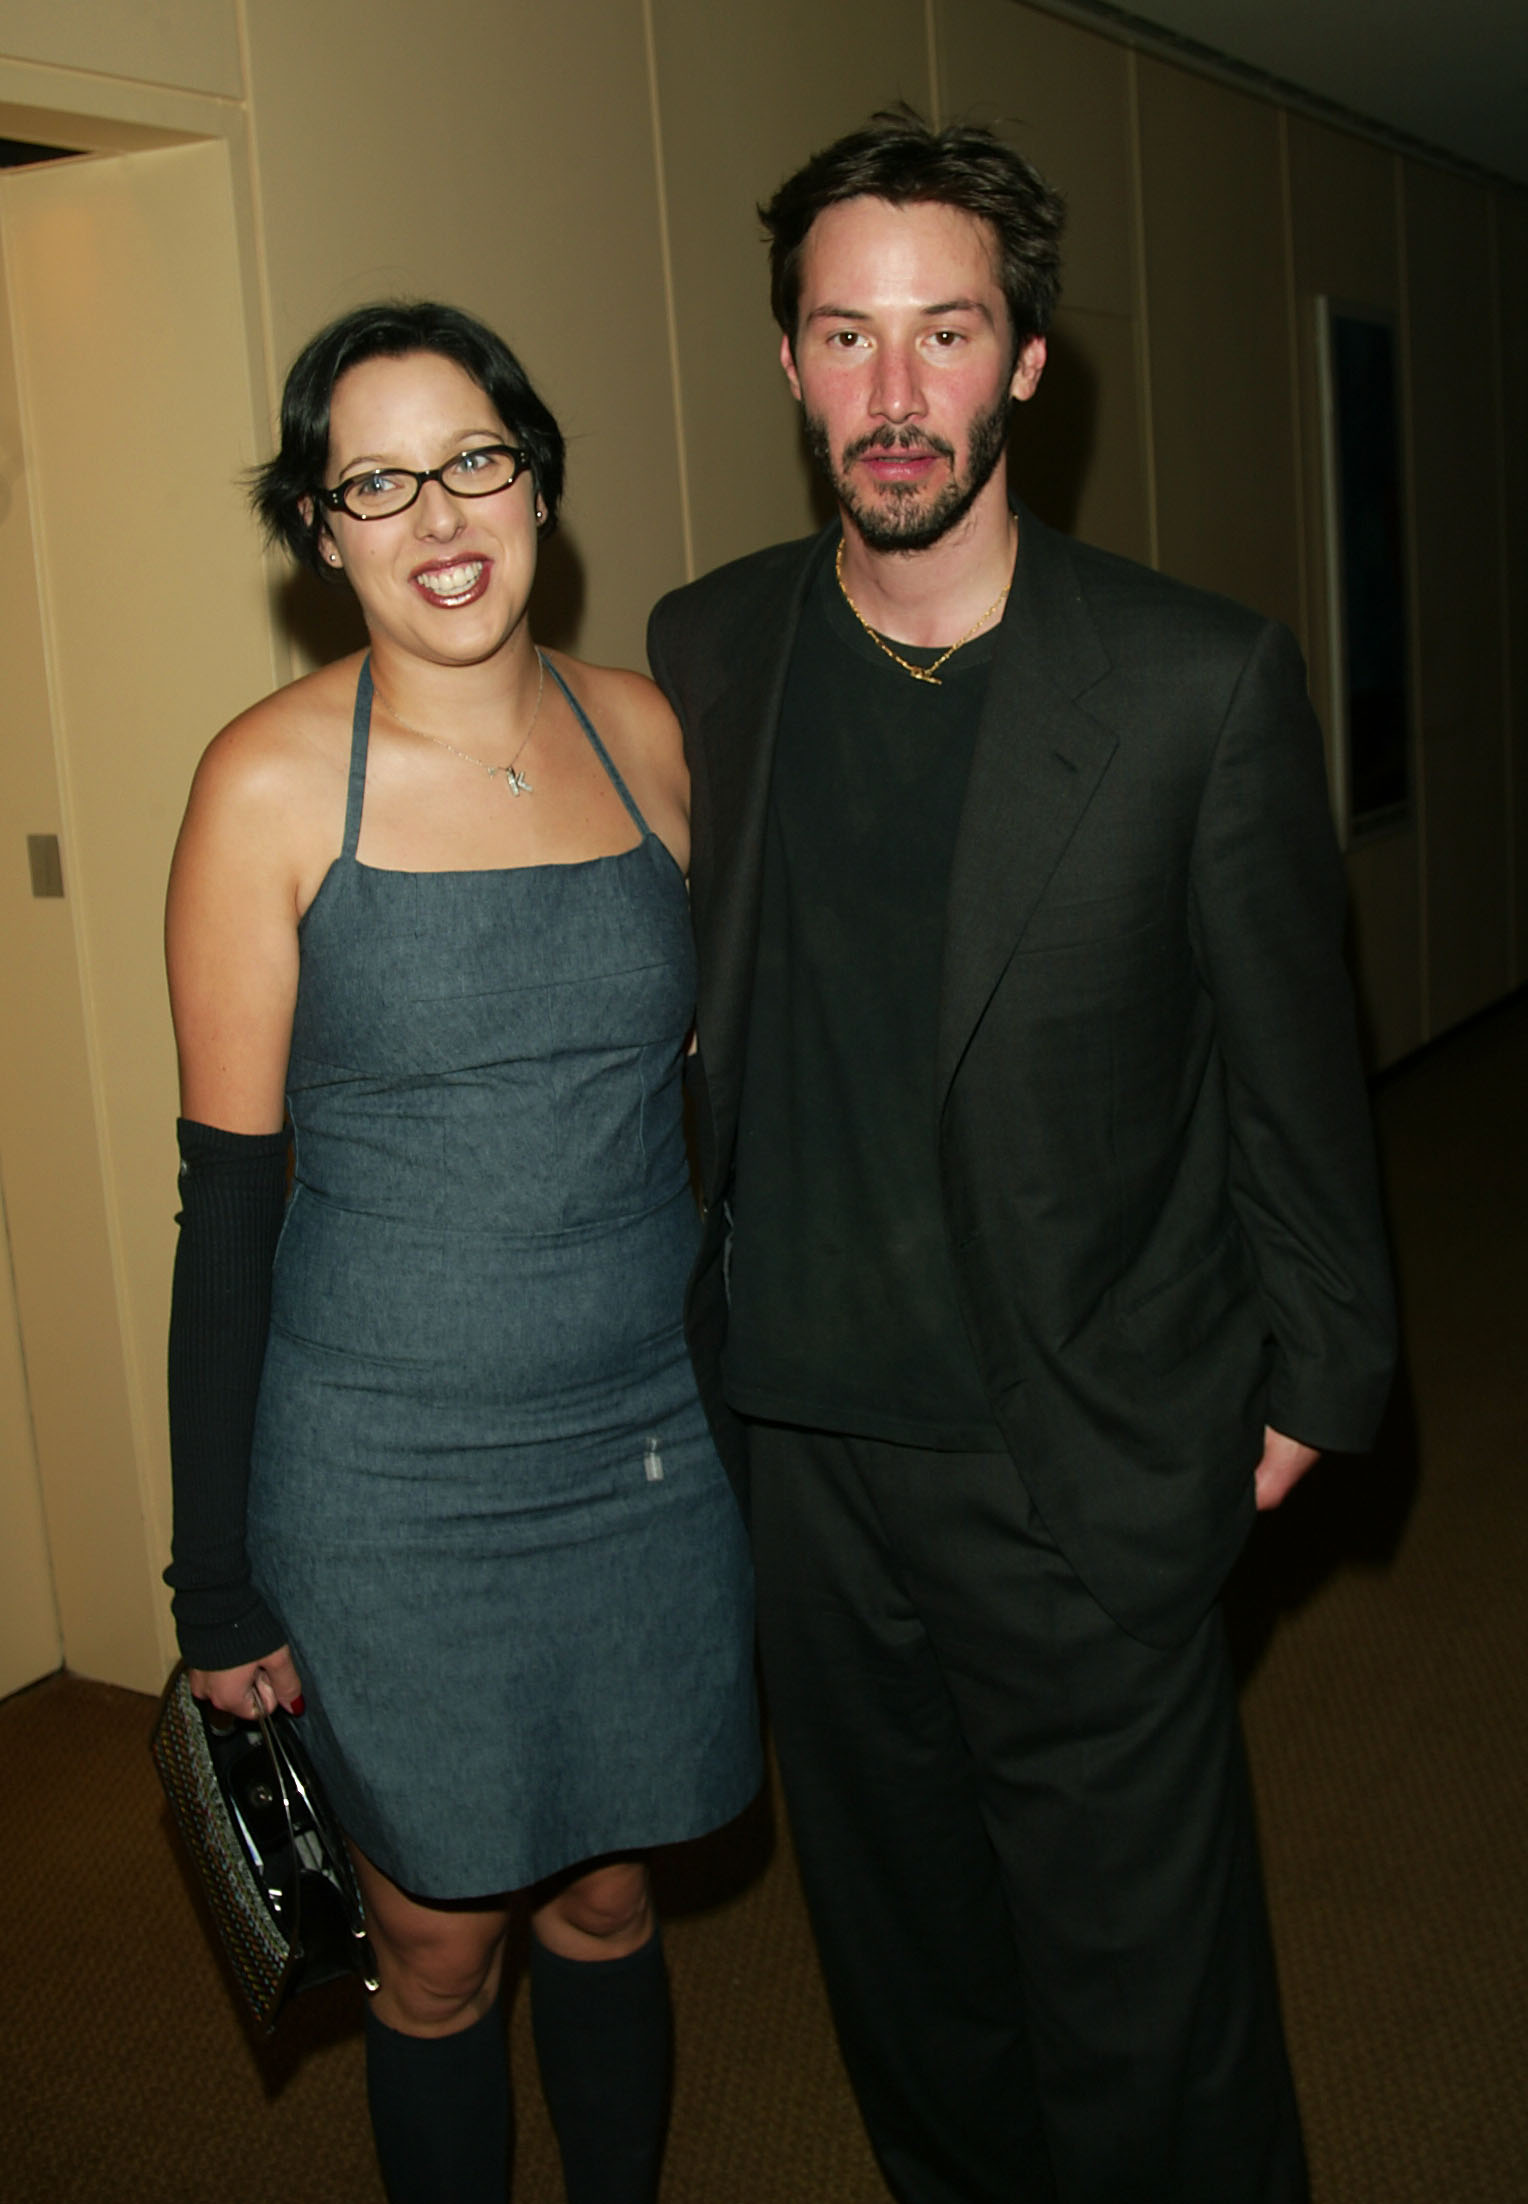 Keanu Reeves mit Karina Miller in New York City. 27. September 2002 | Quelle: Getty Images